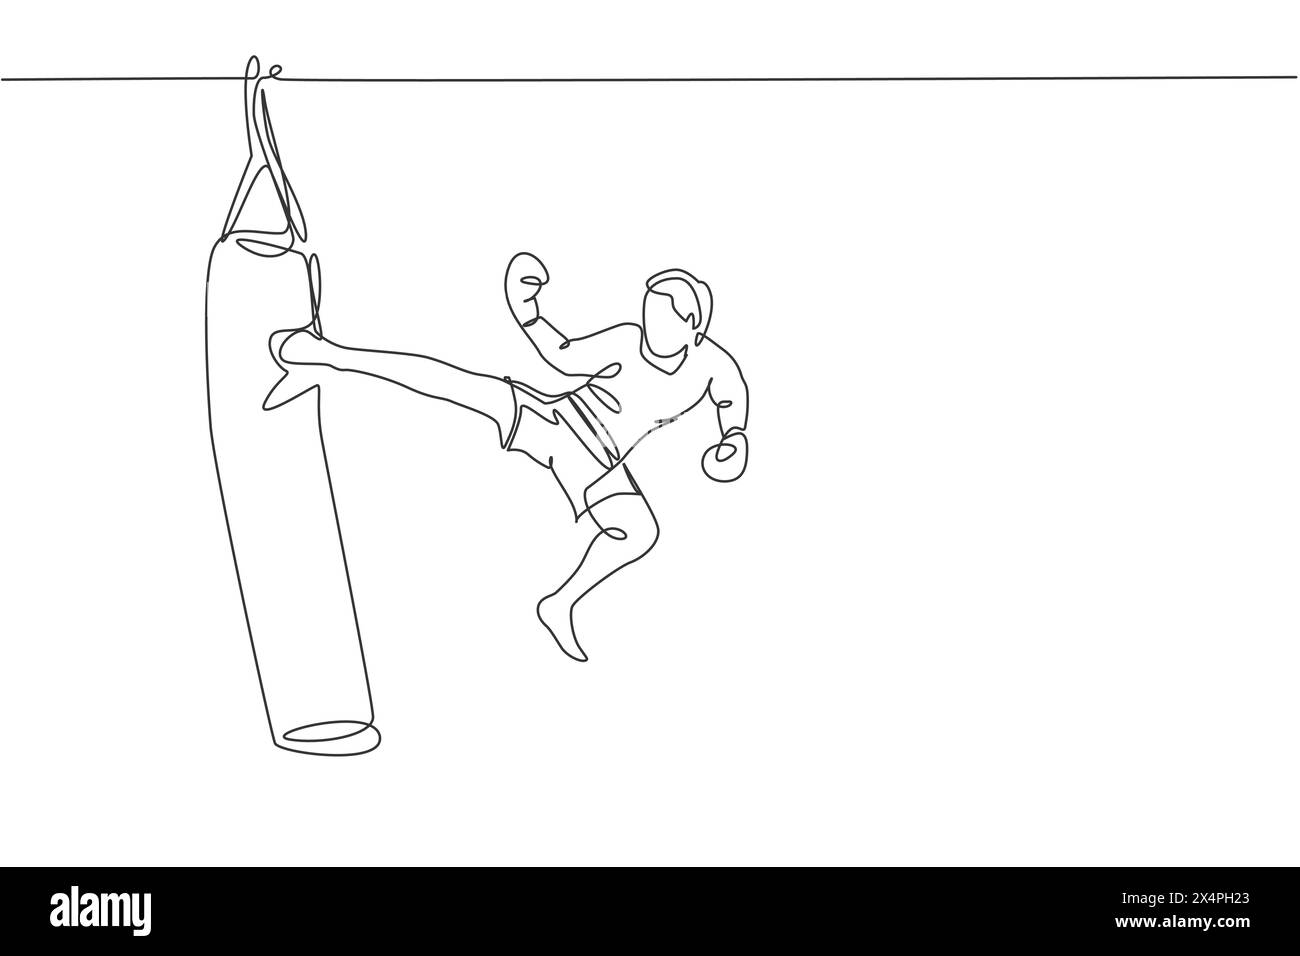 One single line drawing of young energetic man kickboxer practice jump kicking with punch bag in boxing arena vector illustration. Healthy lifestyle s Stock Vector